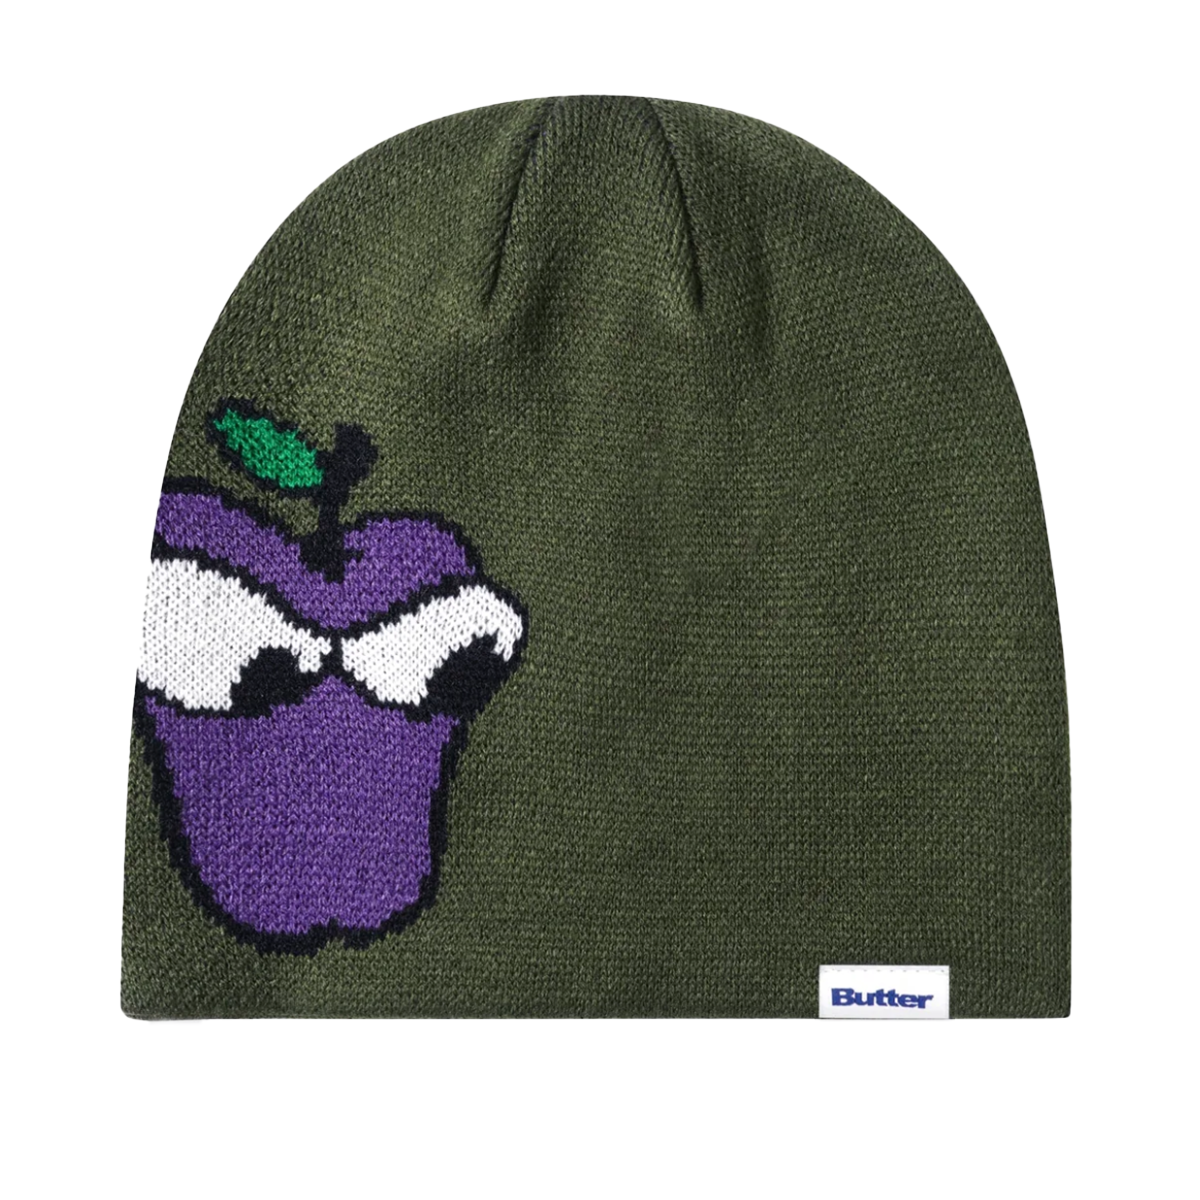 Butter Big Apple Skull Beanie - Assorted Colors